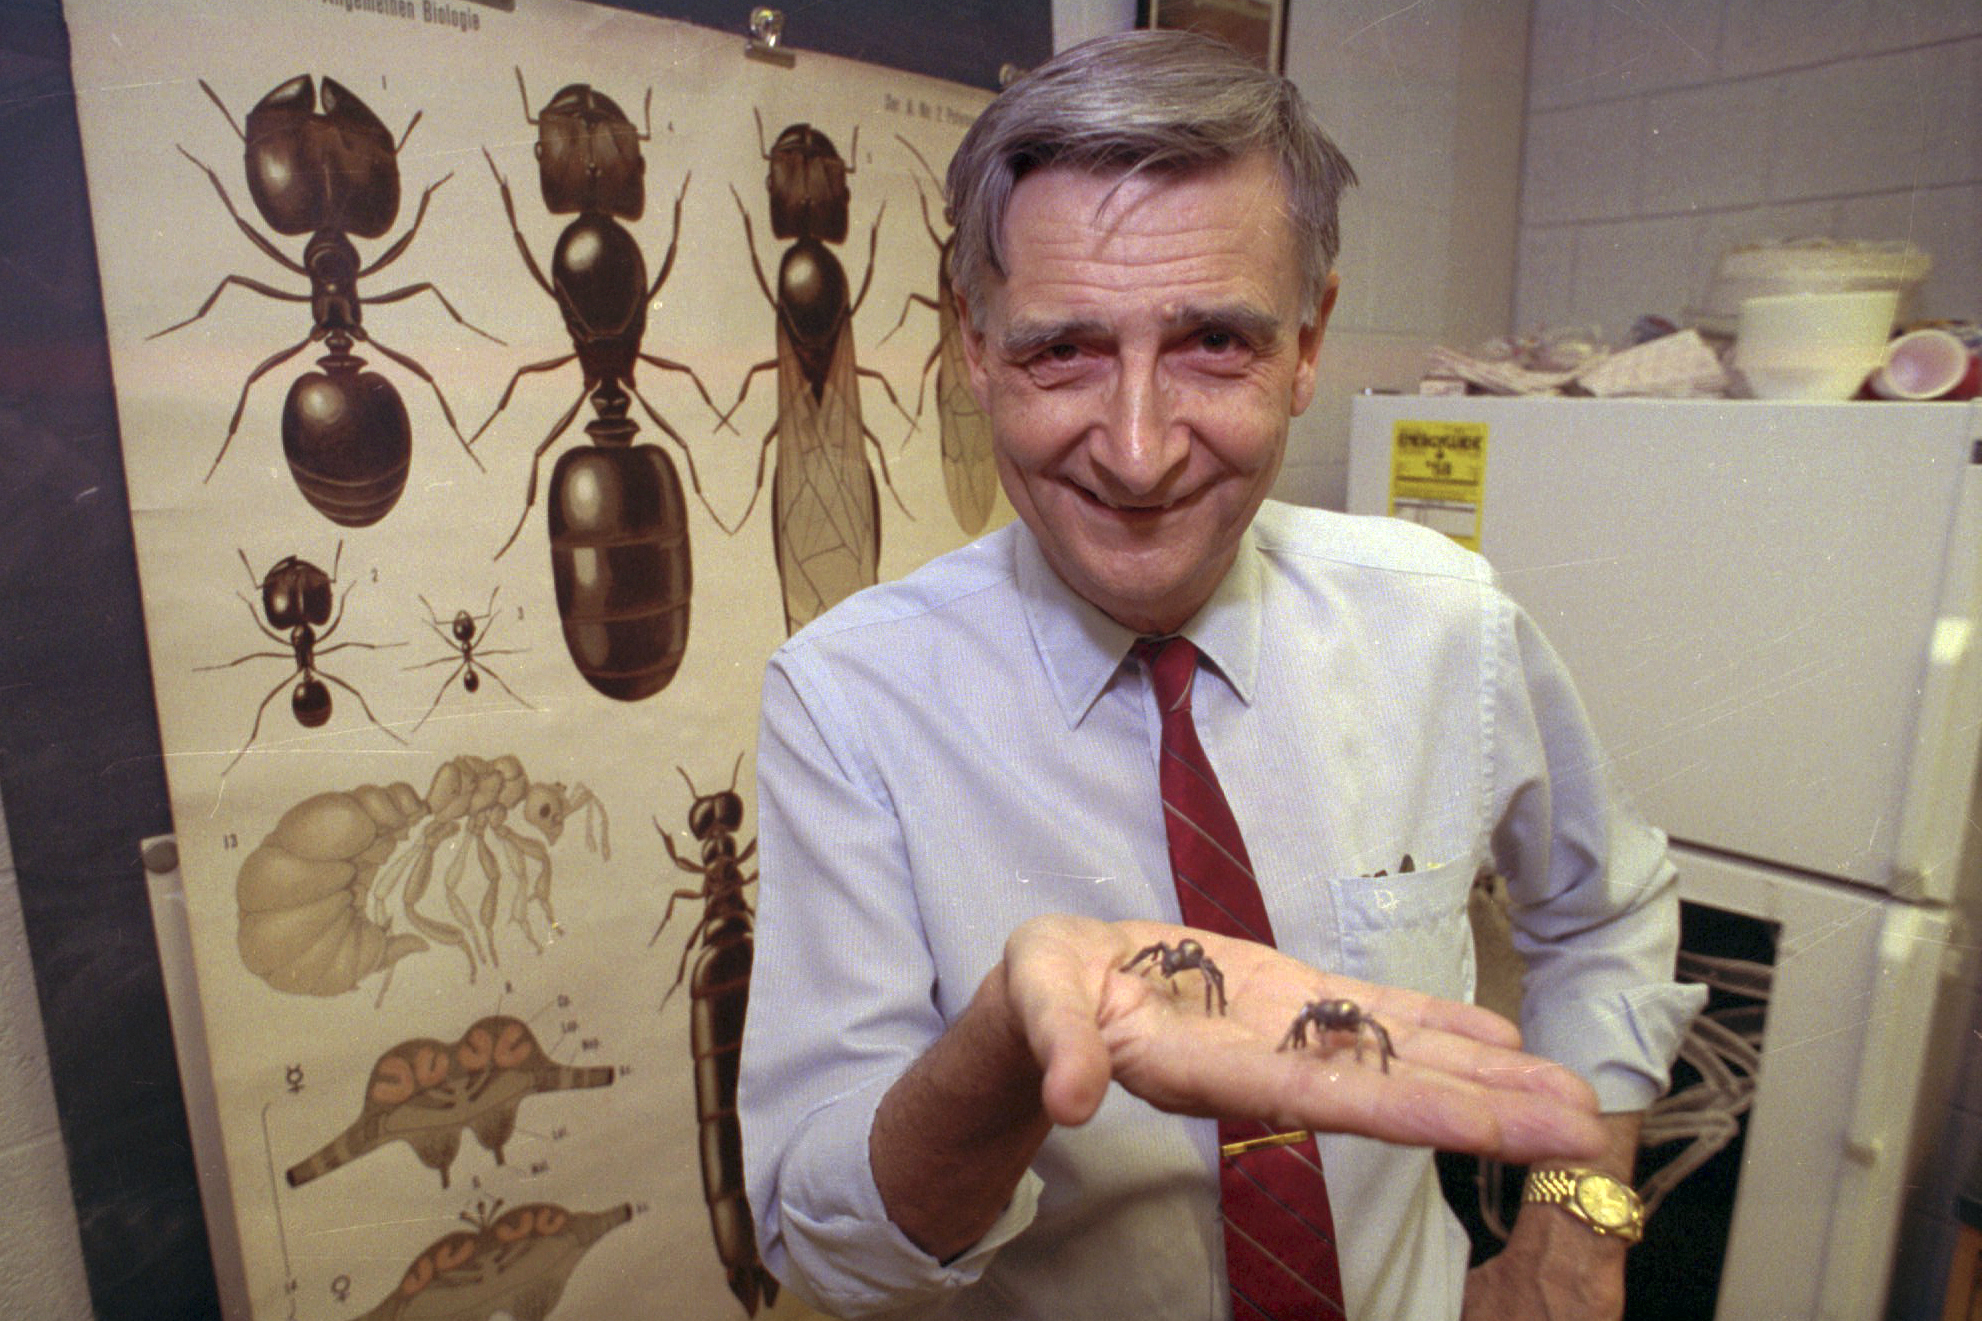 FILE - Edward O. Wilson, co-author of "The Ants," which won the Pulitzer Prize for general non-fiction, poses for a portrait on June 10, 1991. Wilson, the pioneering biologist who argued for a new vision of human nature in “Sociobiology” and warned against the decline of ecosystems, died on Sunday, Dec. 26, 2021. He was 92. (AP Photo/File)